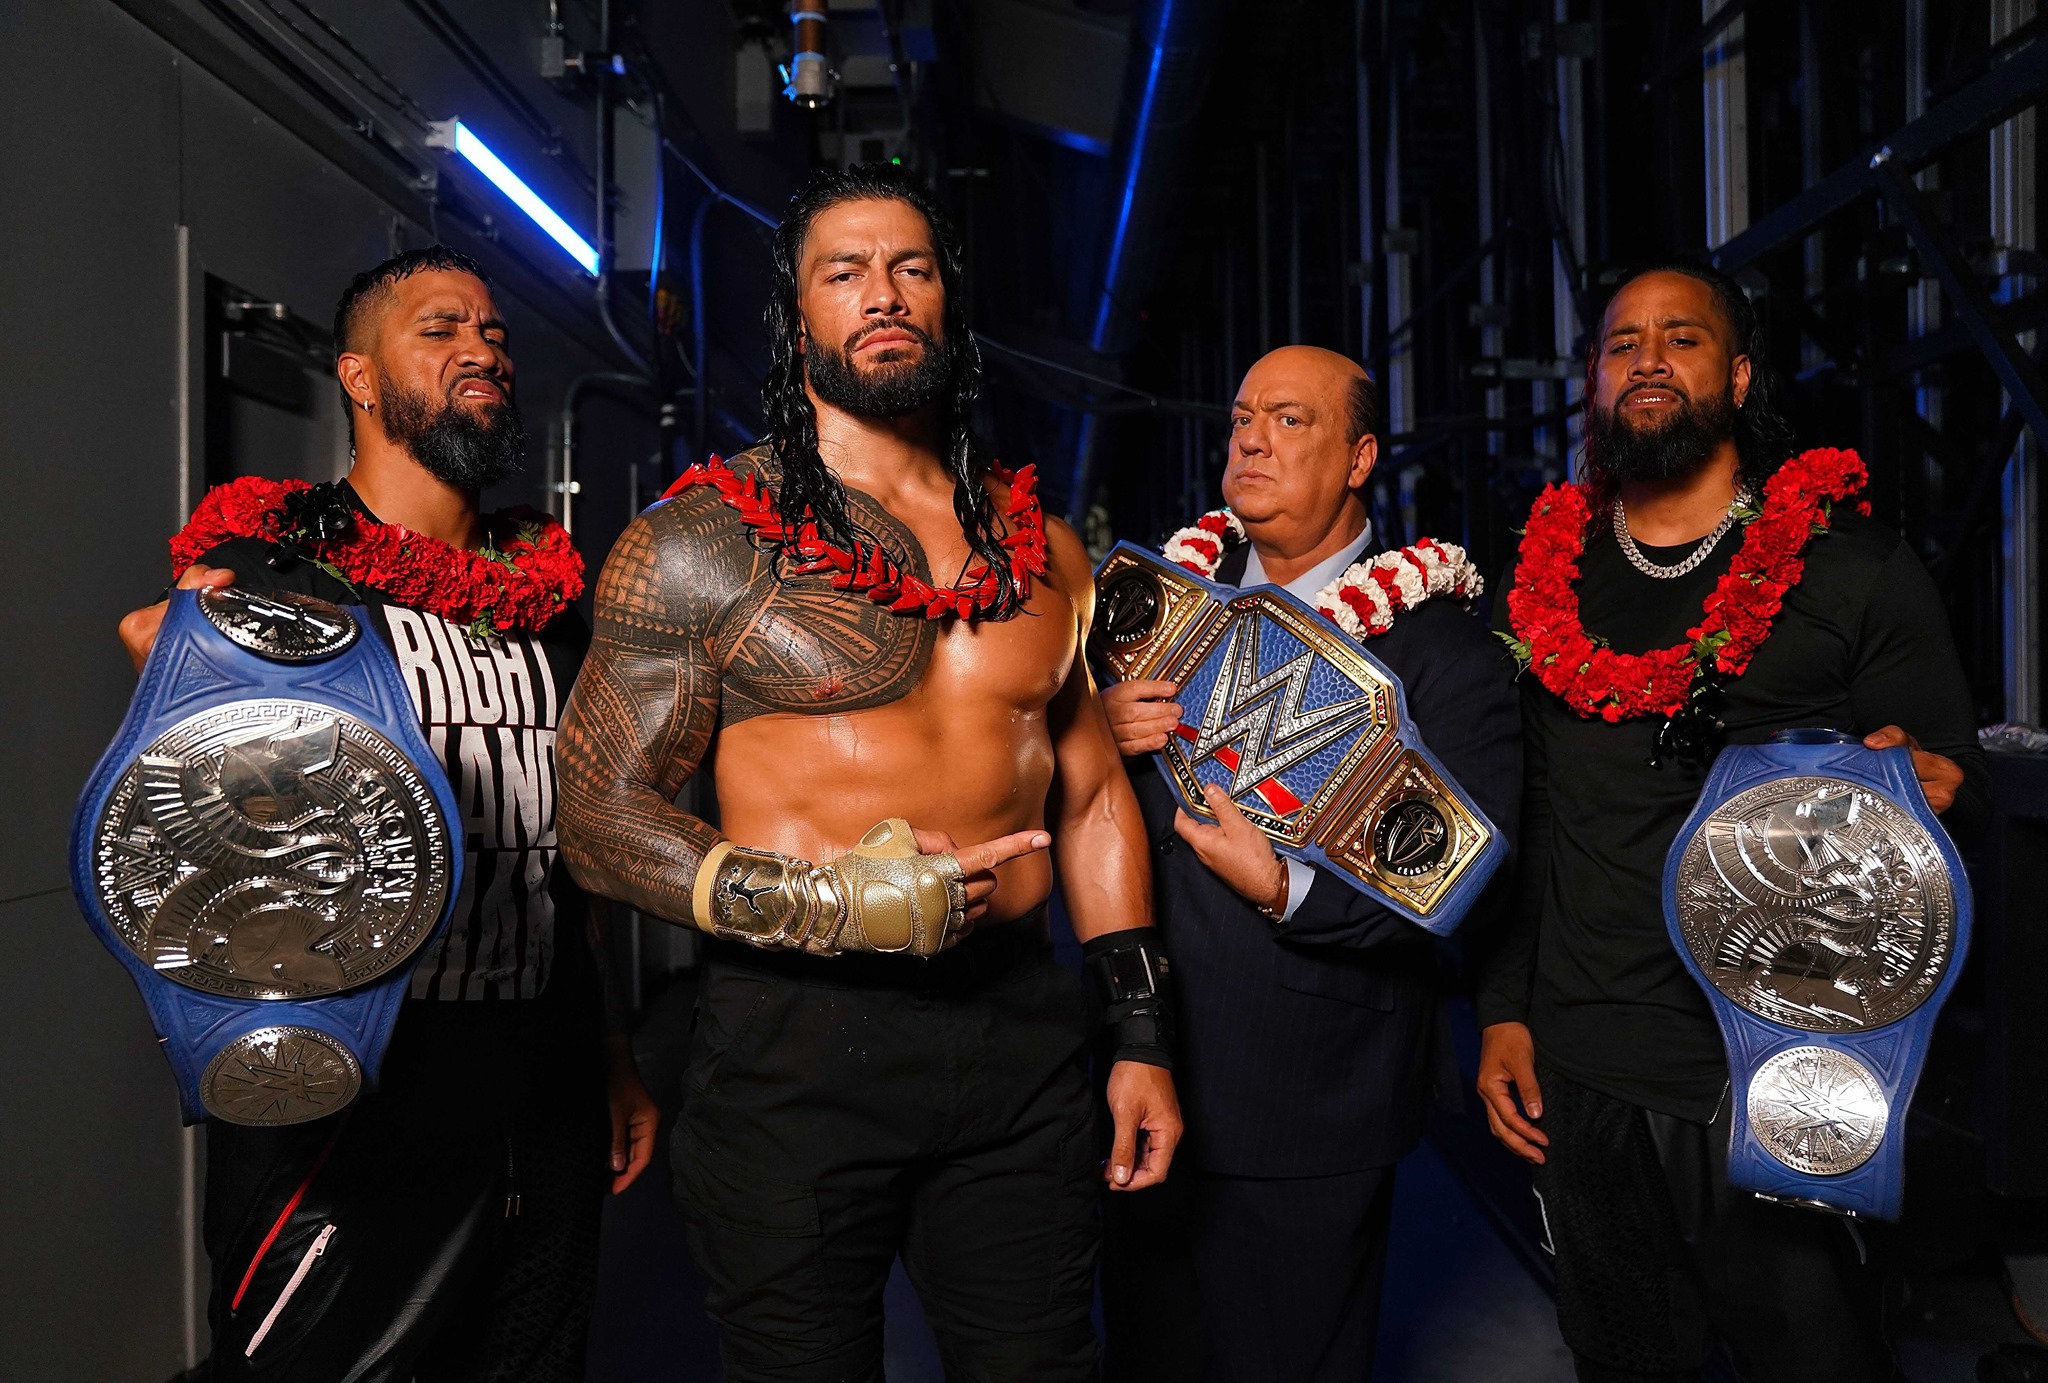 Roman Reigns Fires Paul Heyman On This Week's Episode Of WWE SmackDown